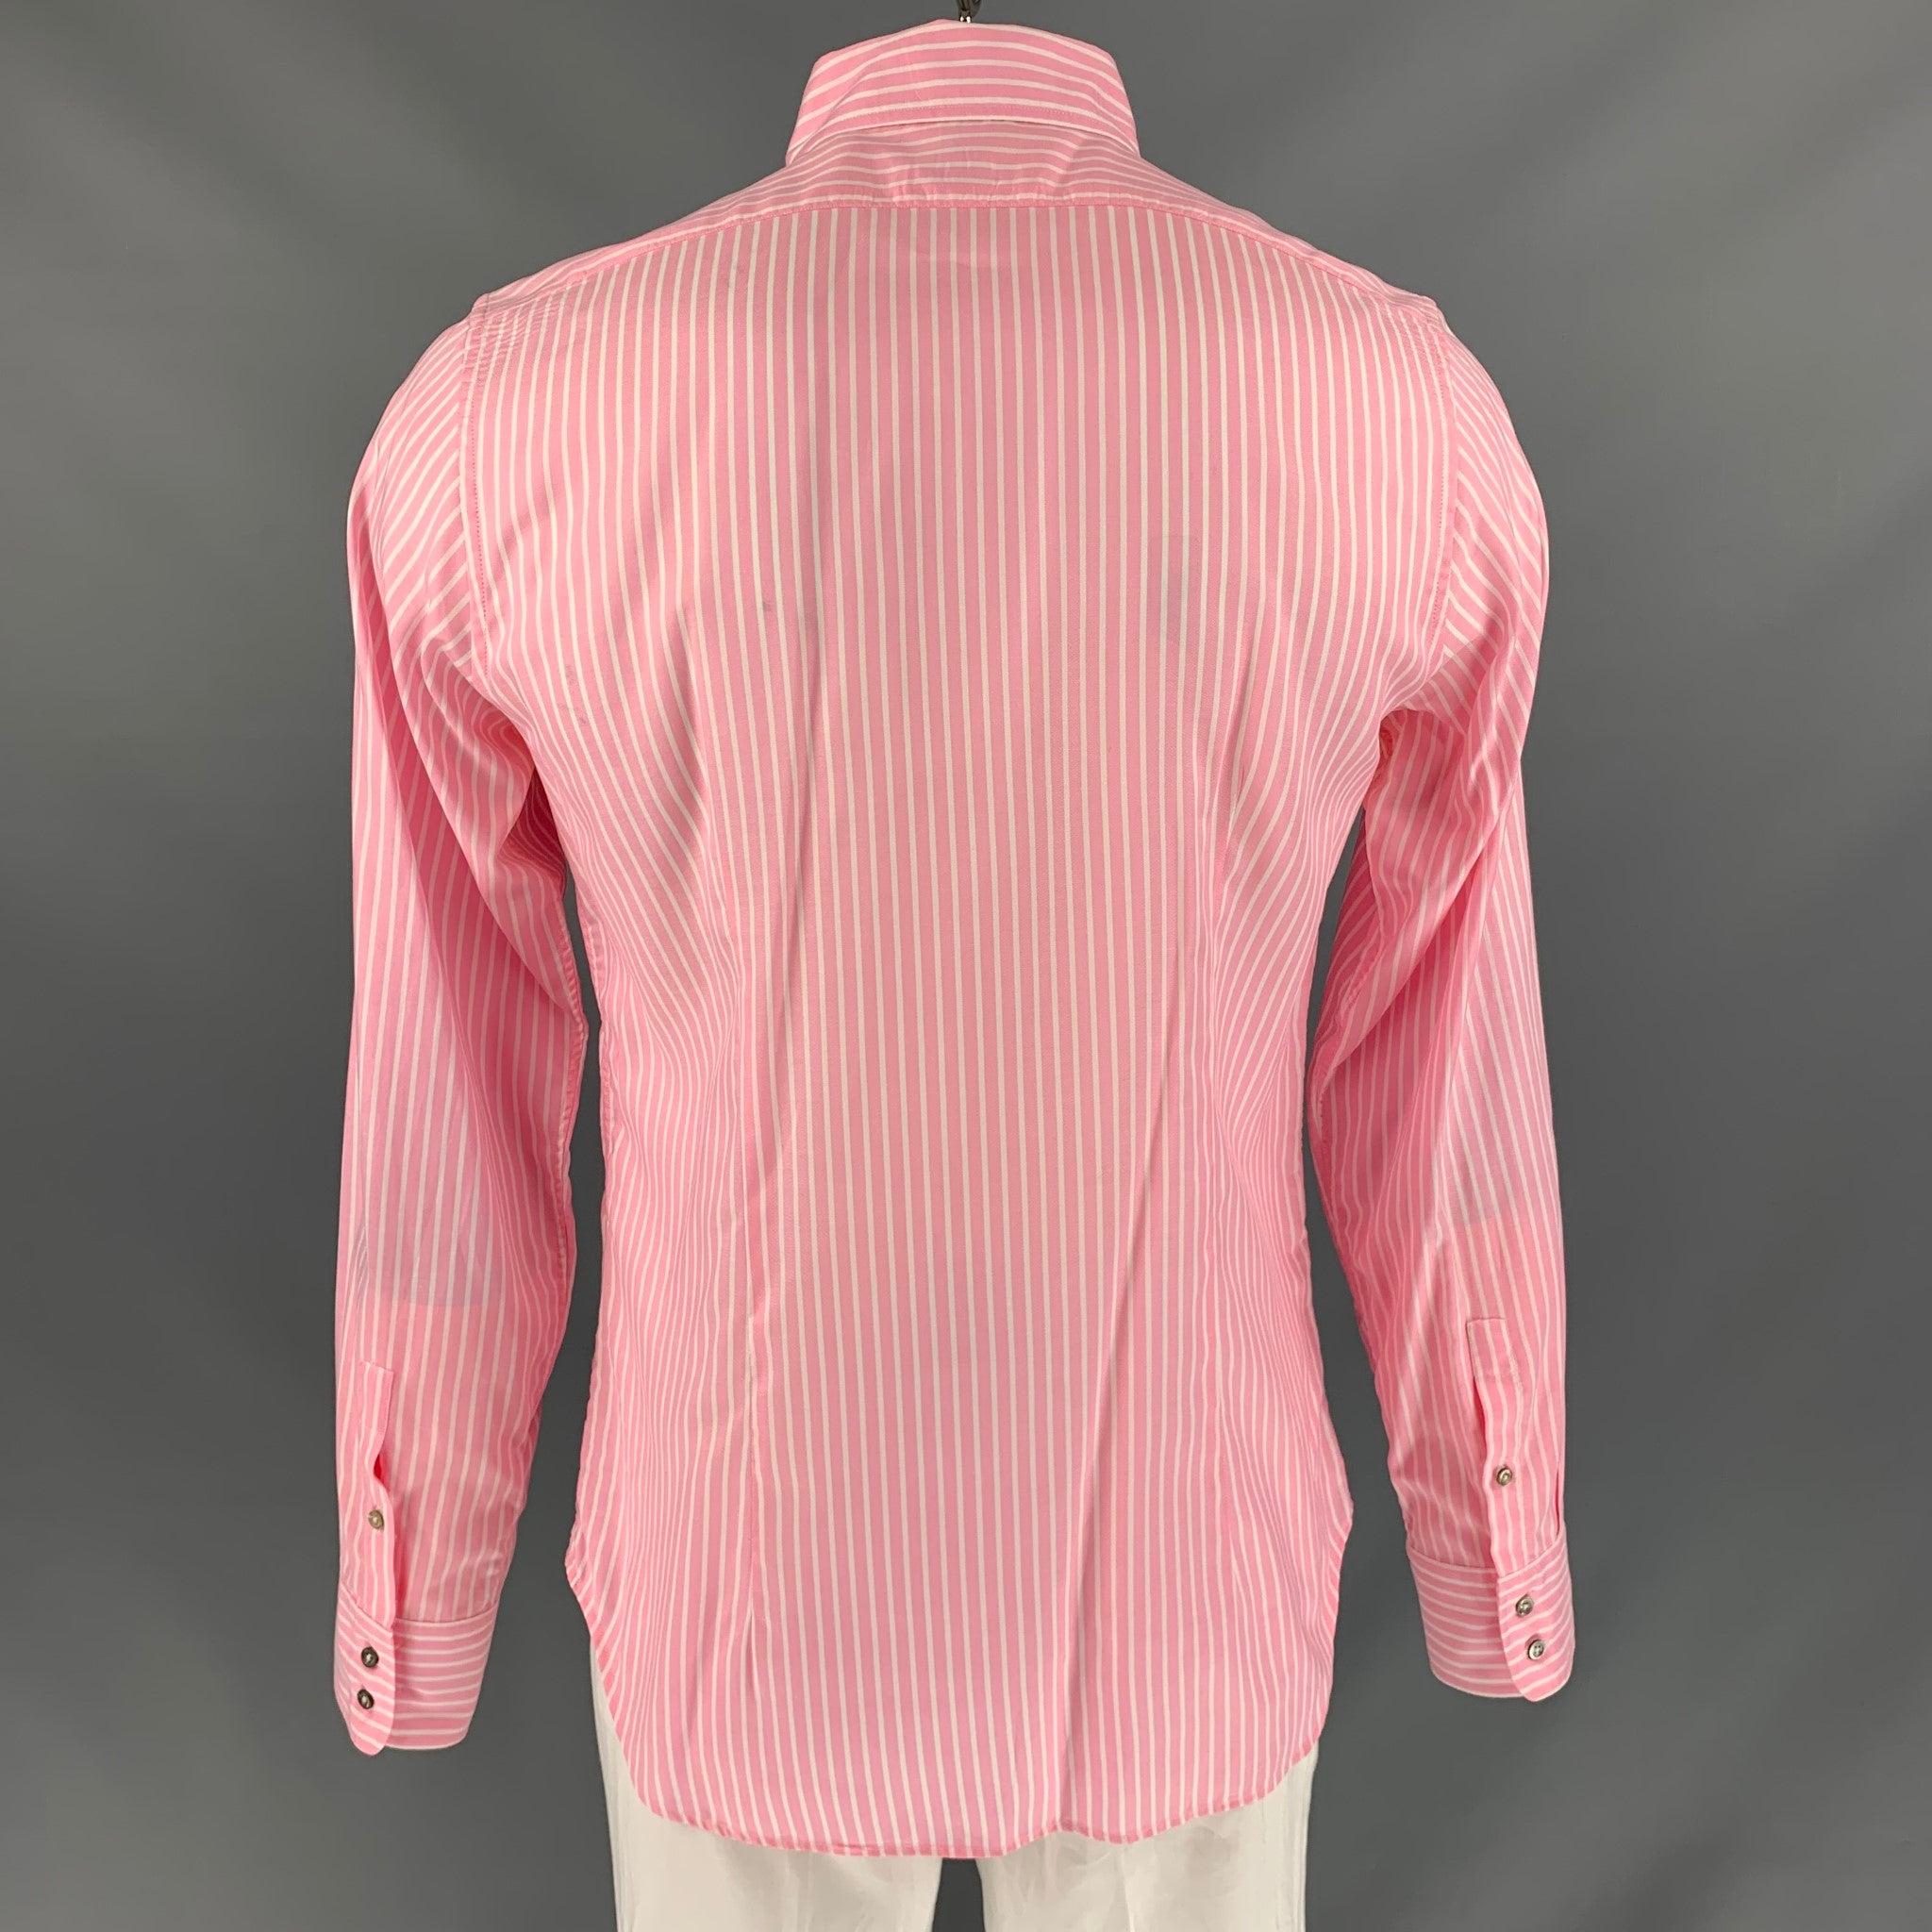 JIL SANDER Size 42 Pink White & Stripe Cotton Button Down Long Sleeve Shirt In Excellent Condition For Sale In San Francisco, CA